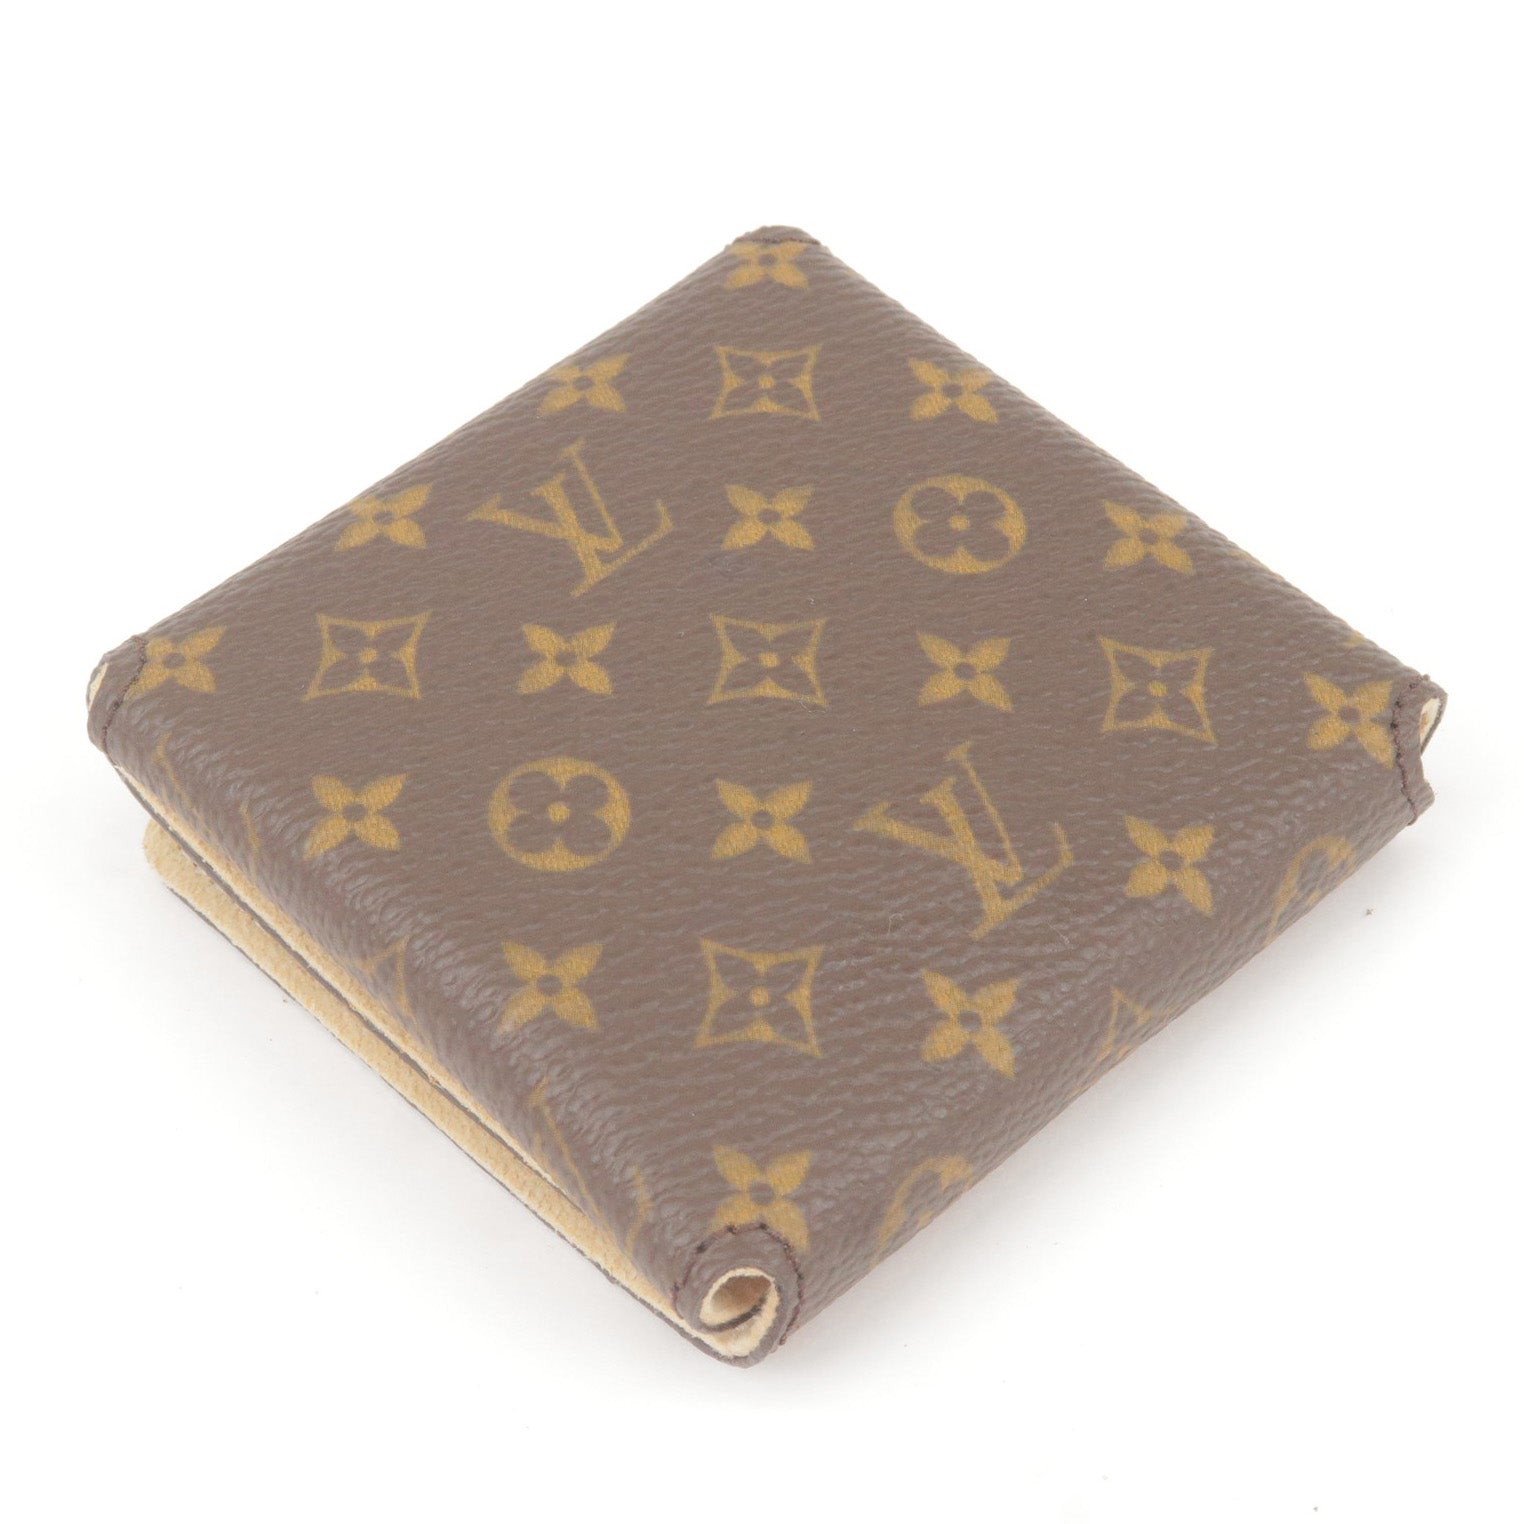 Louis Vuitton's accessories and jewelry are all about the monogram